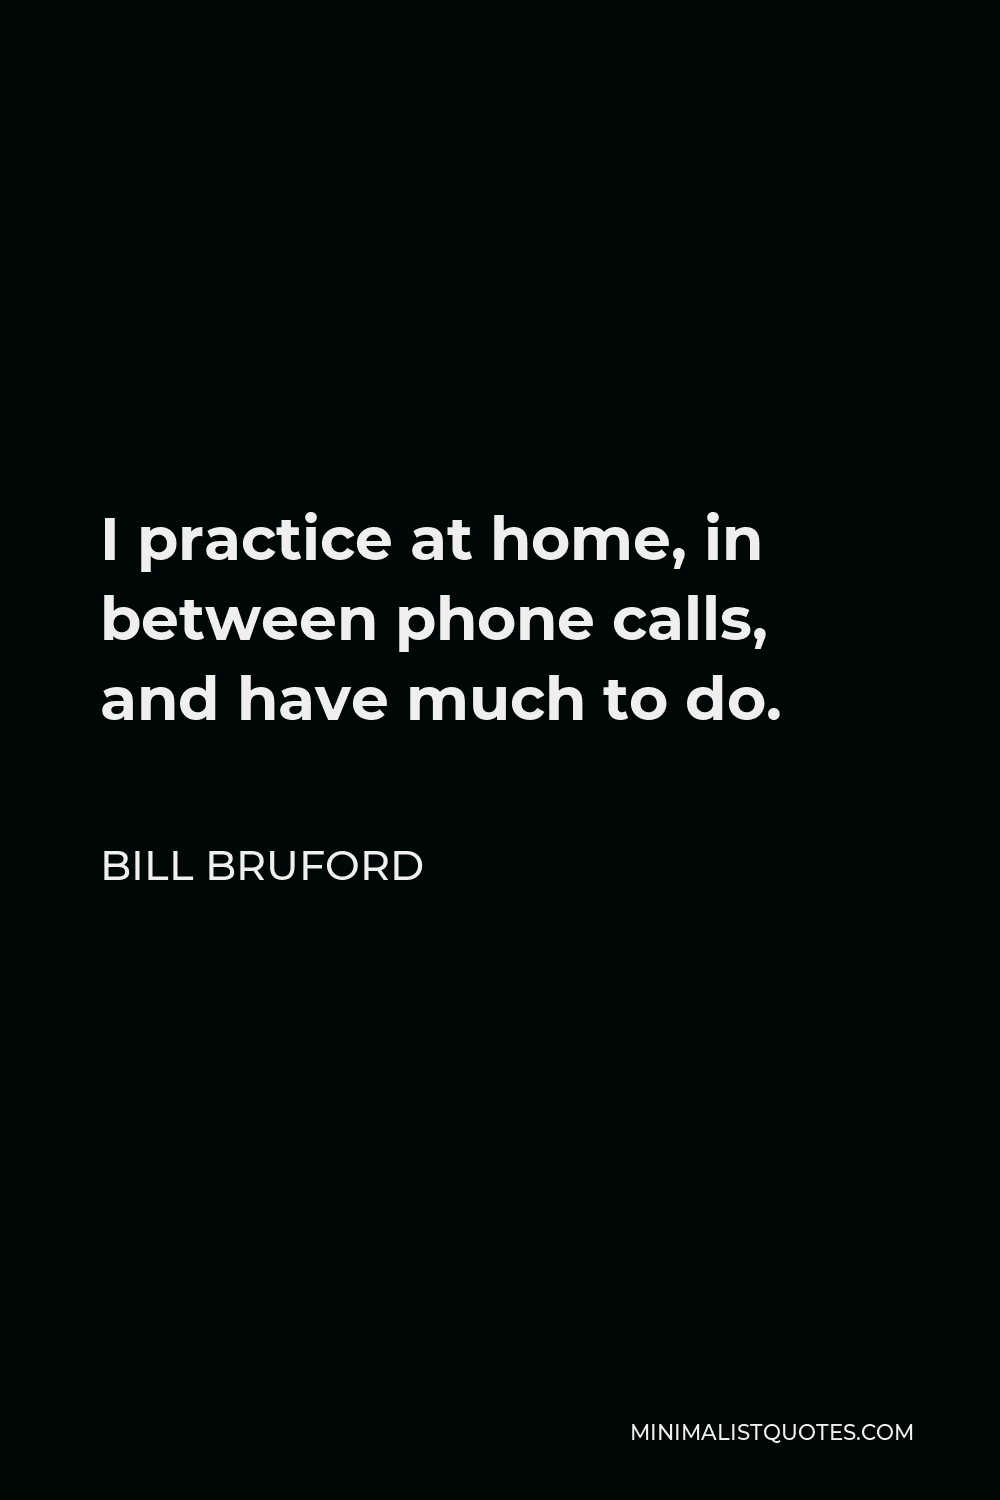 Bill Bruford Quote - I practice at home, in between phone calls, and have much to do.